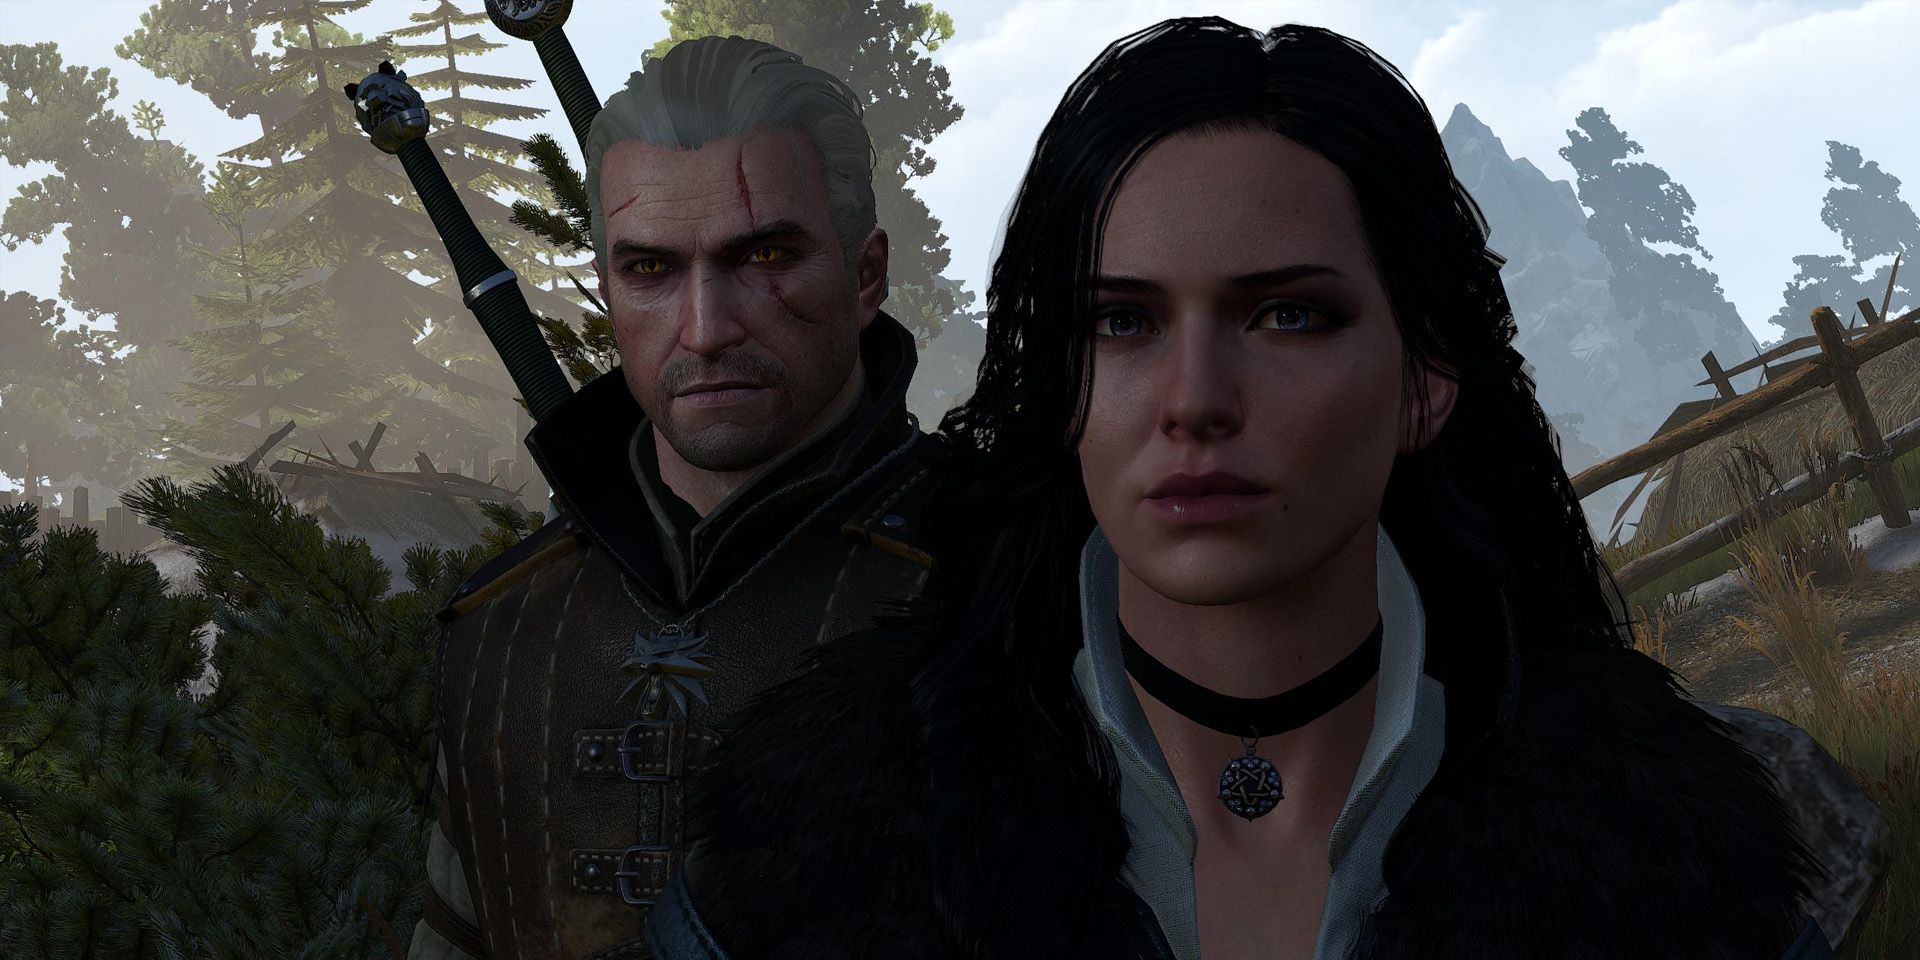 Geralt can treat Yen pretty badly in The Witcher 3